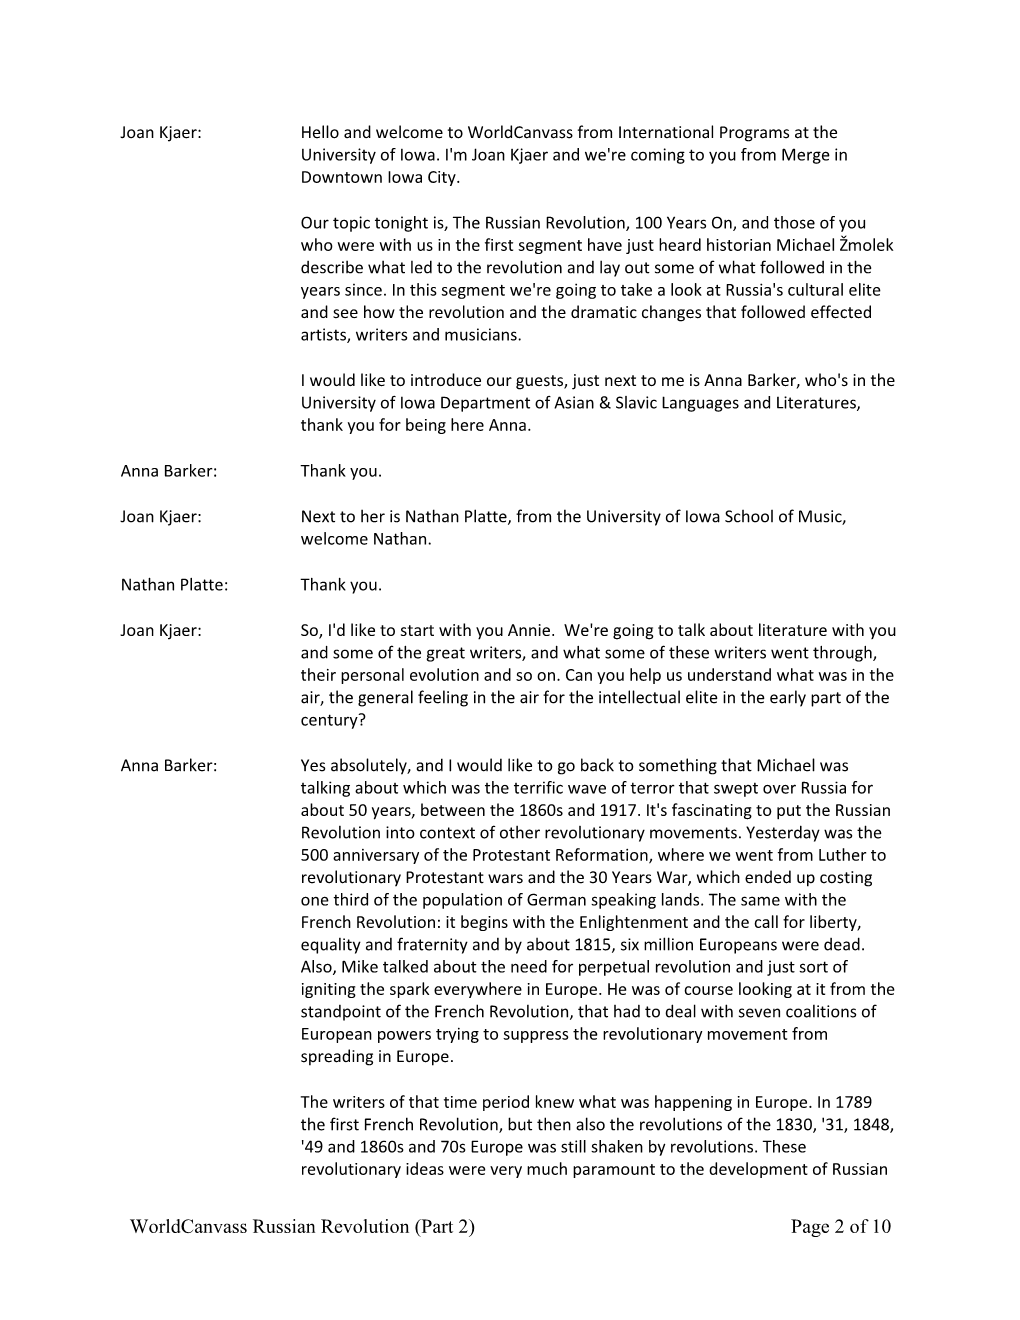 Worldcanvass Russian Revolution (Part 2) Page 2 of 10